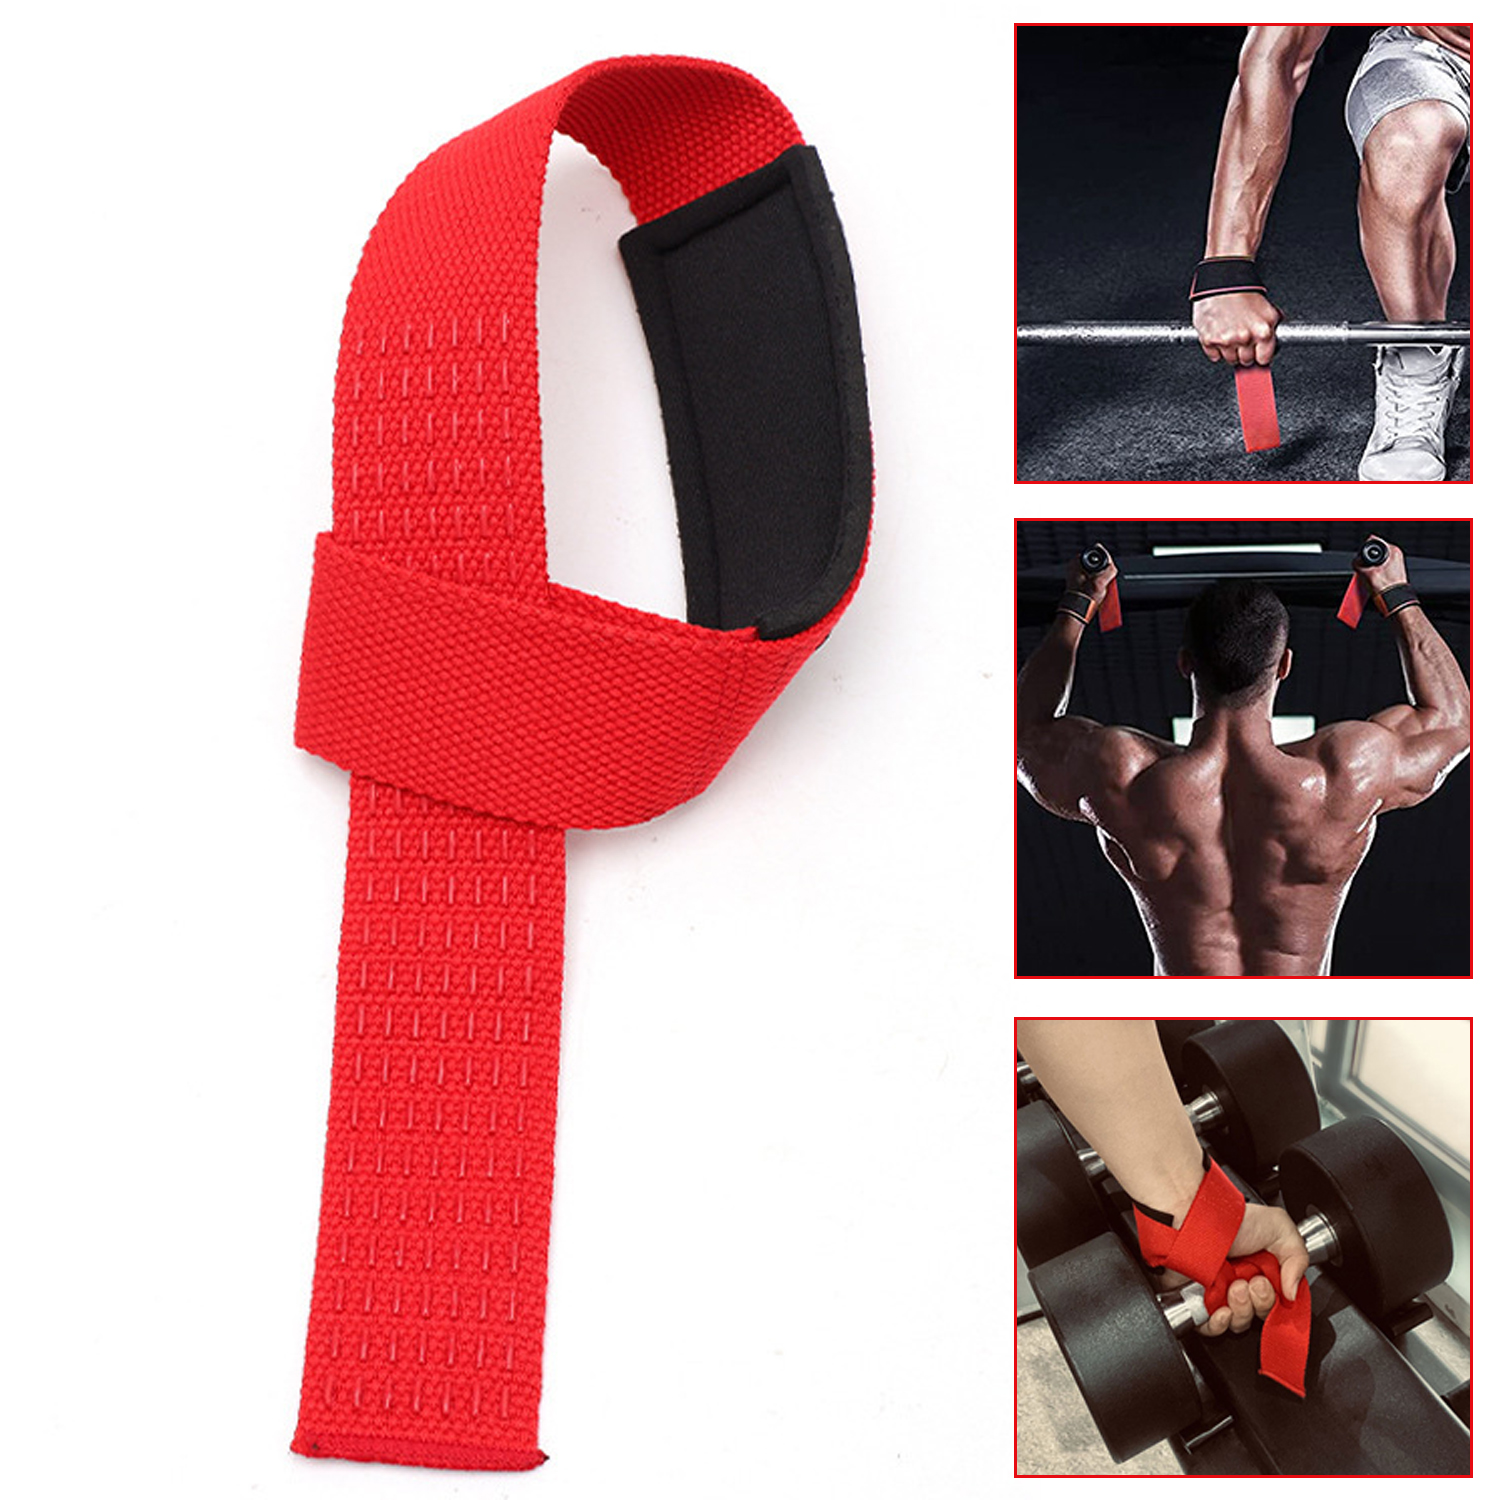 Wrist Wraps Wrist Straps For Weightlifting Cross Training Lift Straps Fitness Safty